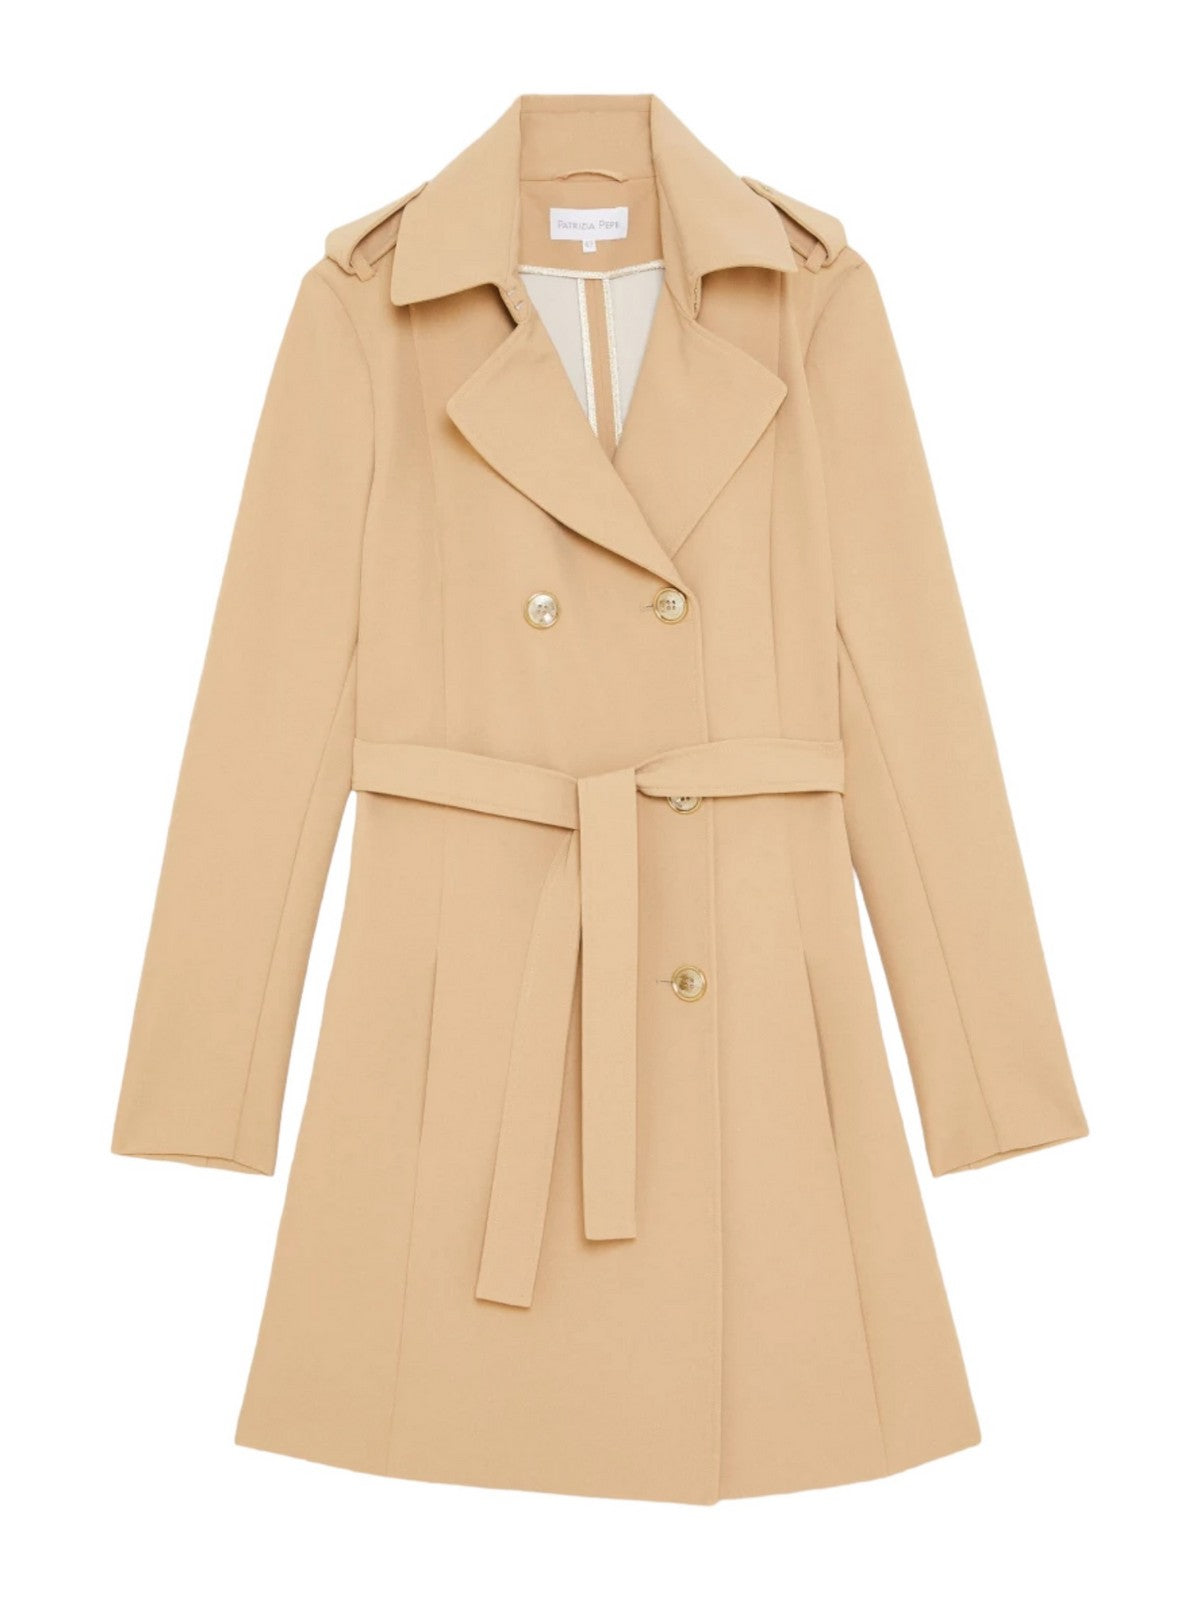 PATRIZIA PEPE Trench Donna  CO0188 A2AW B663 Beige